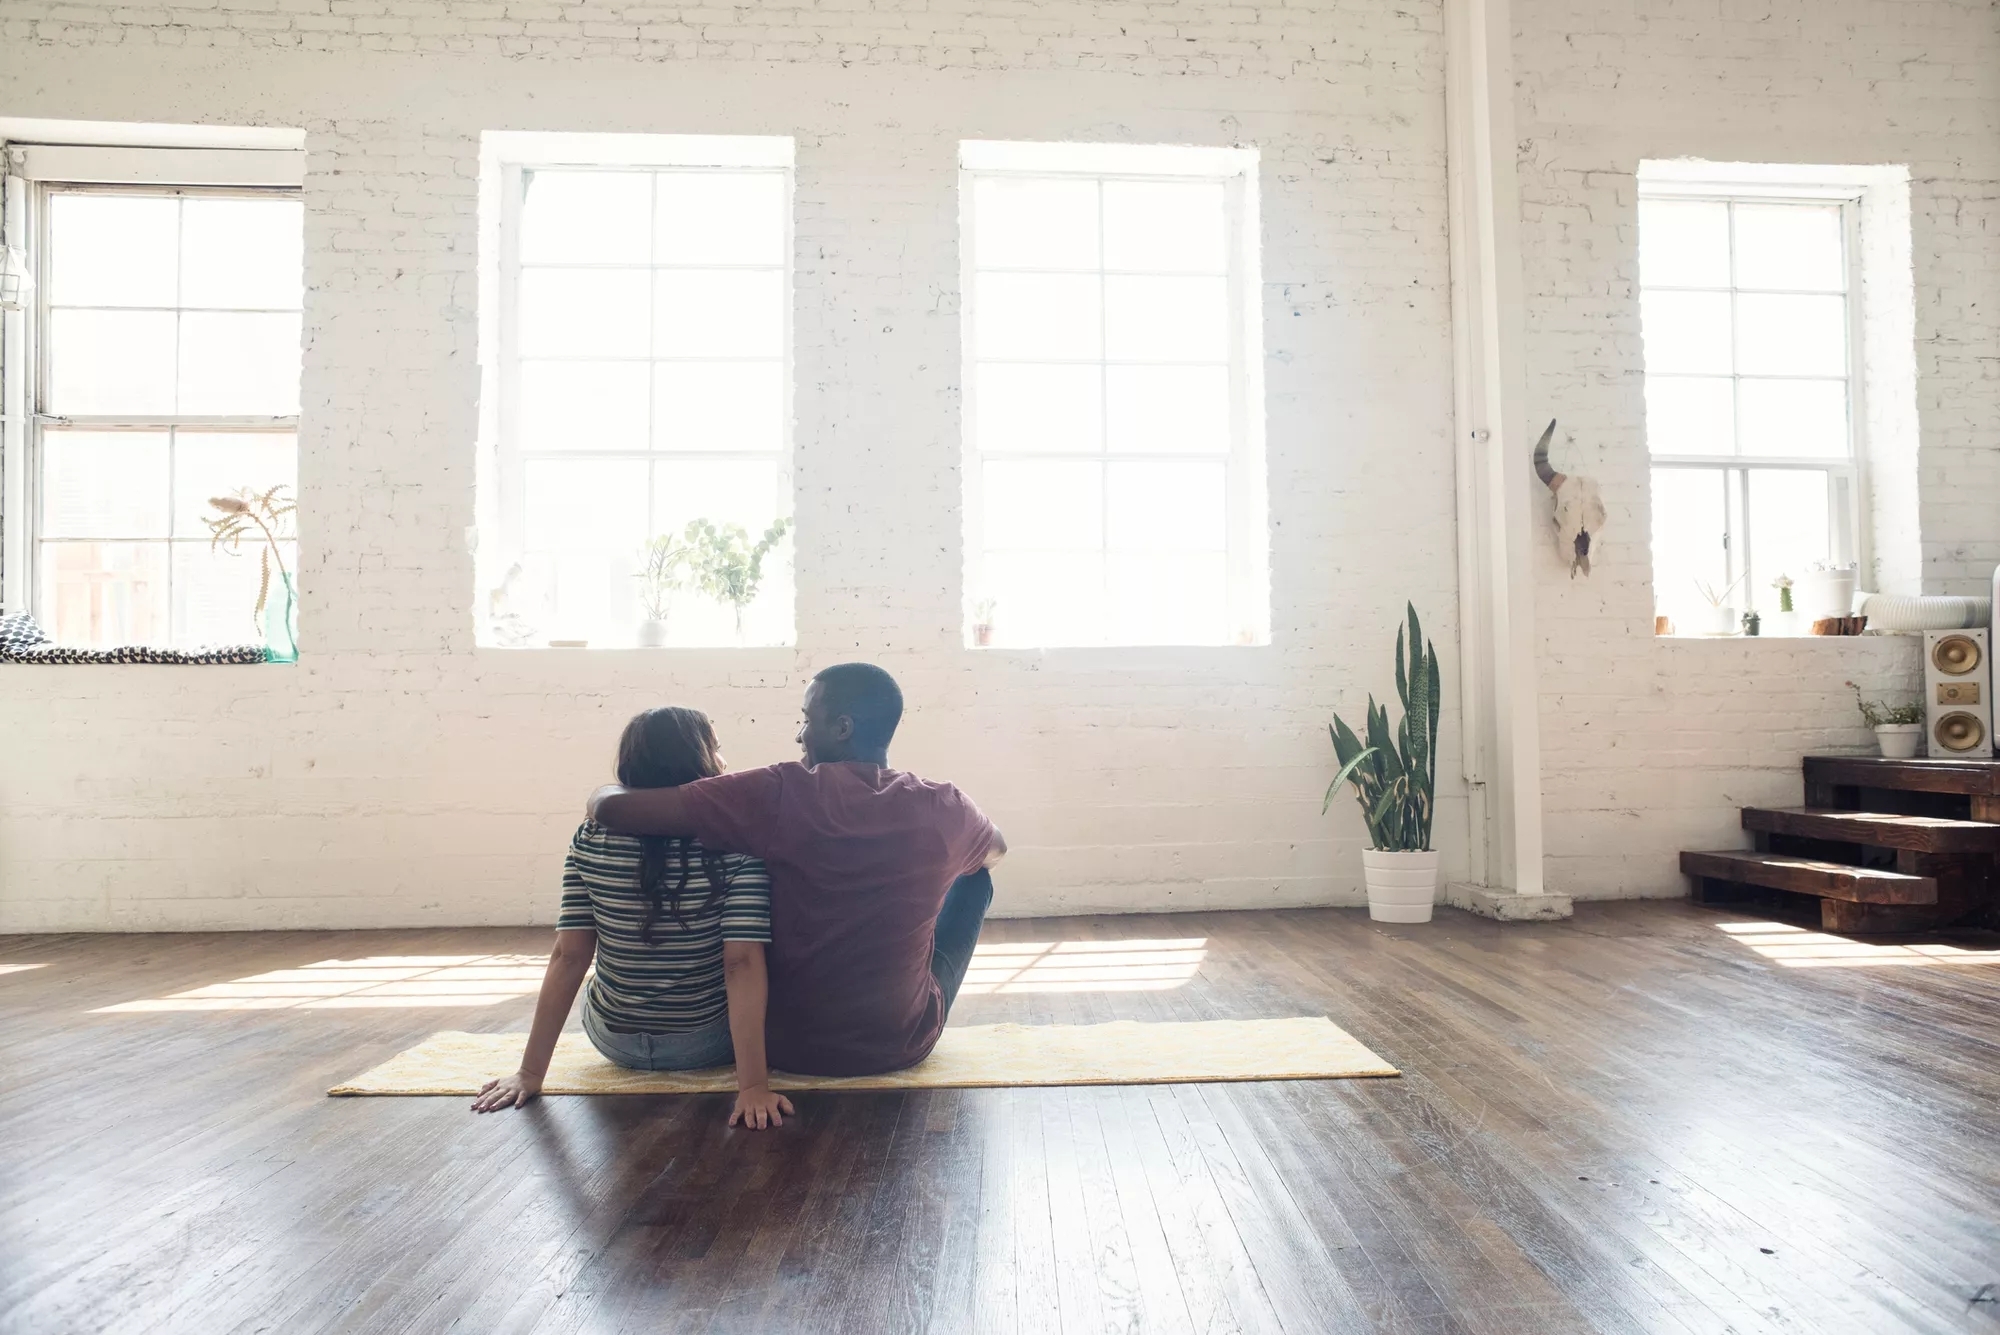 Two people sitting on a yoga mat in an emtpy room on the hardwood floor. They're looking jubilantly out the window towards the bright sky across from camera.